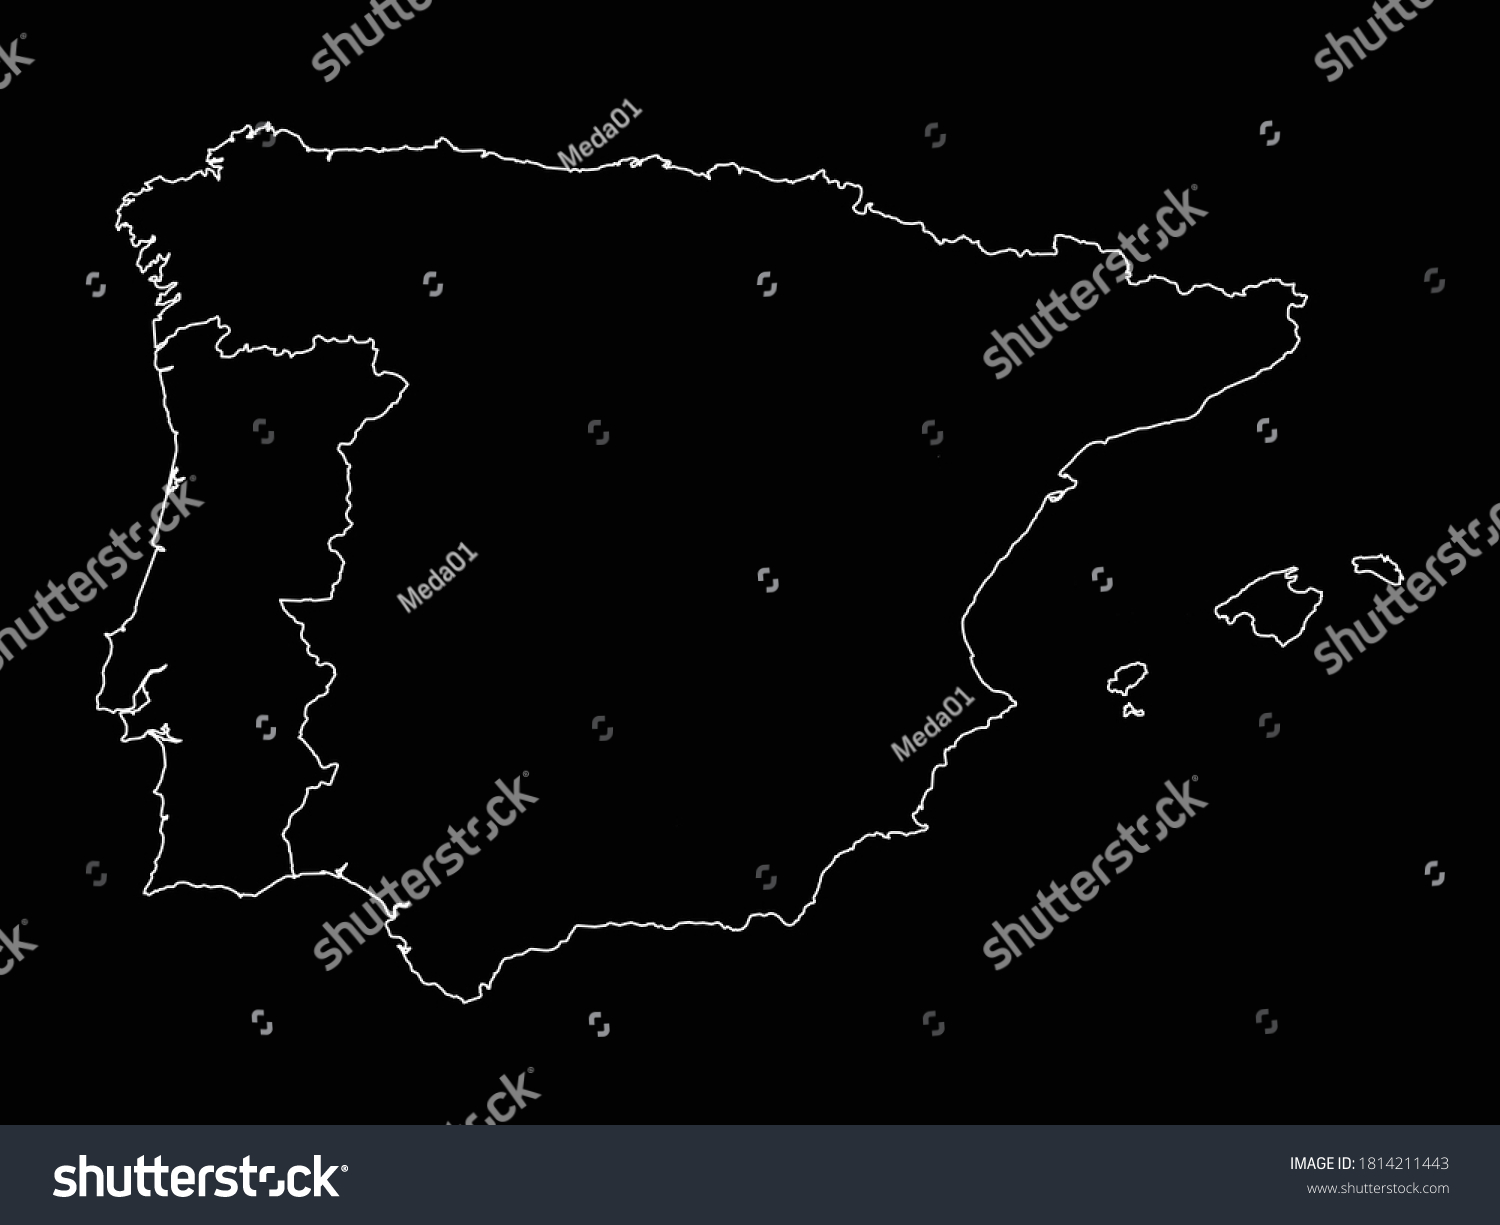 Stock Vector Vector Illustration Of Outline Map Of Iberian Peninsula Countries On Black Background 1814211443 